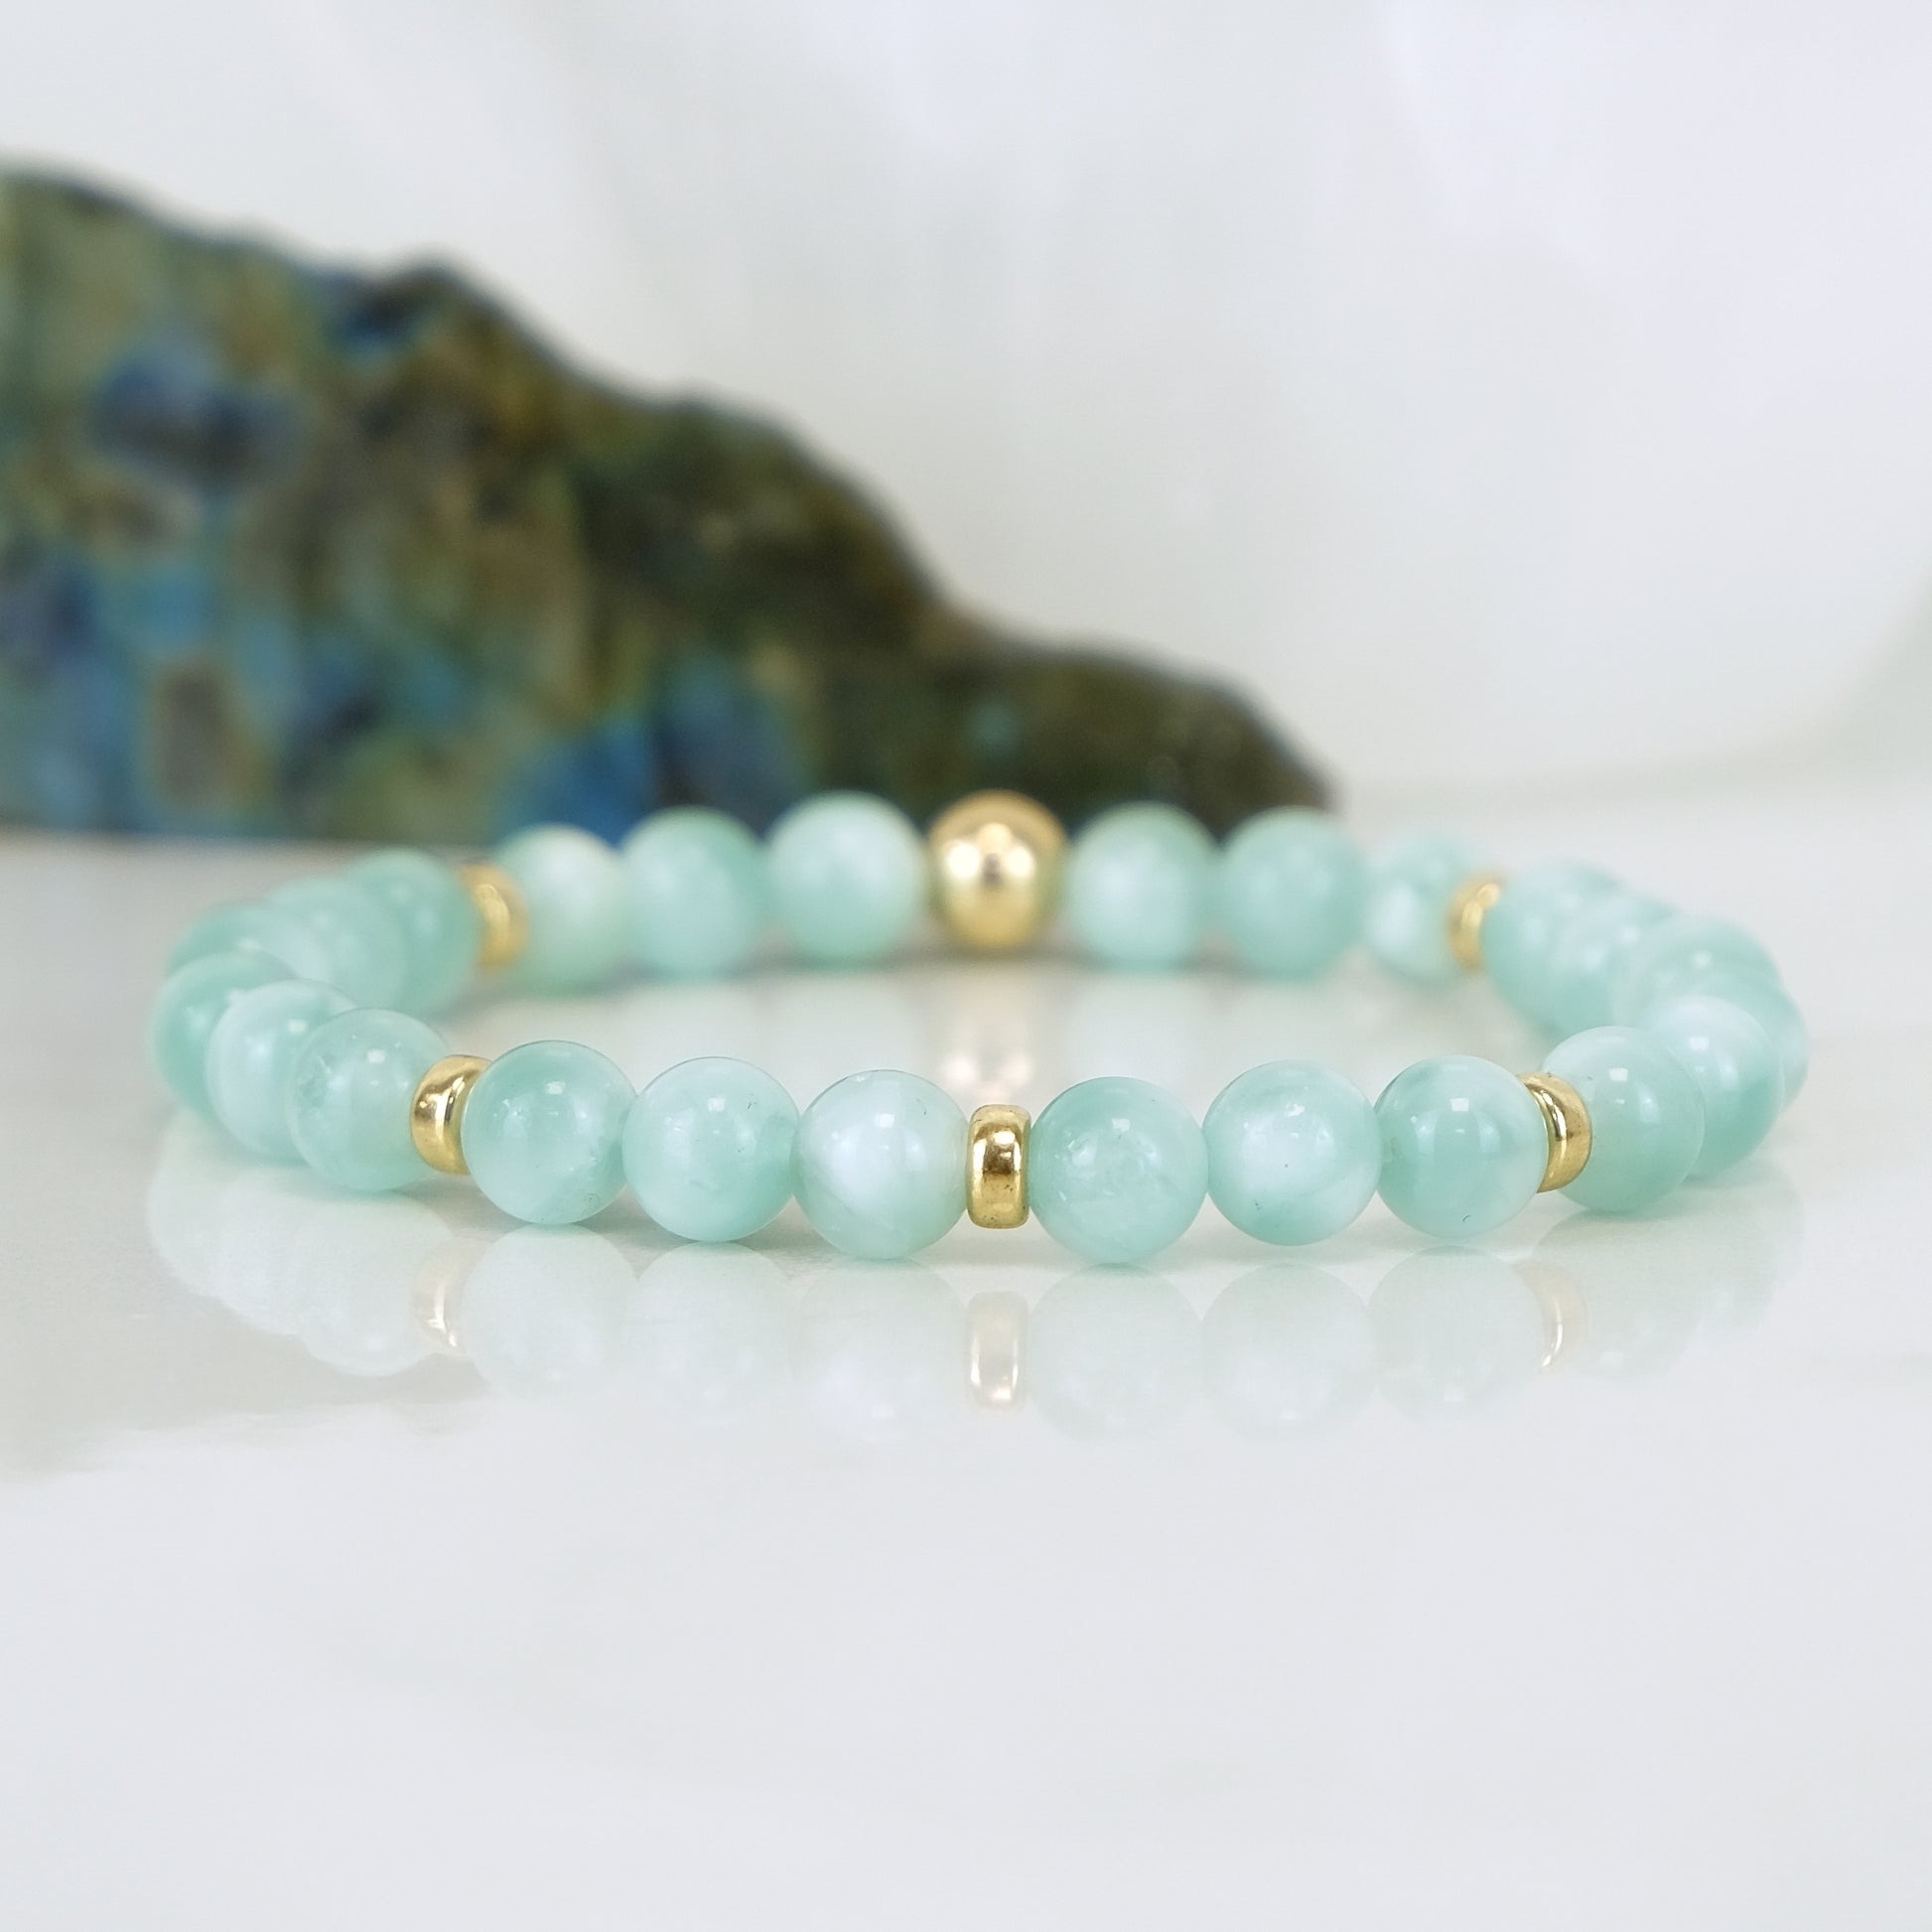 A green moonstone gemstone bracelet in 6mm with gold filled accessories